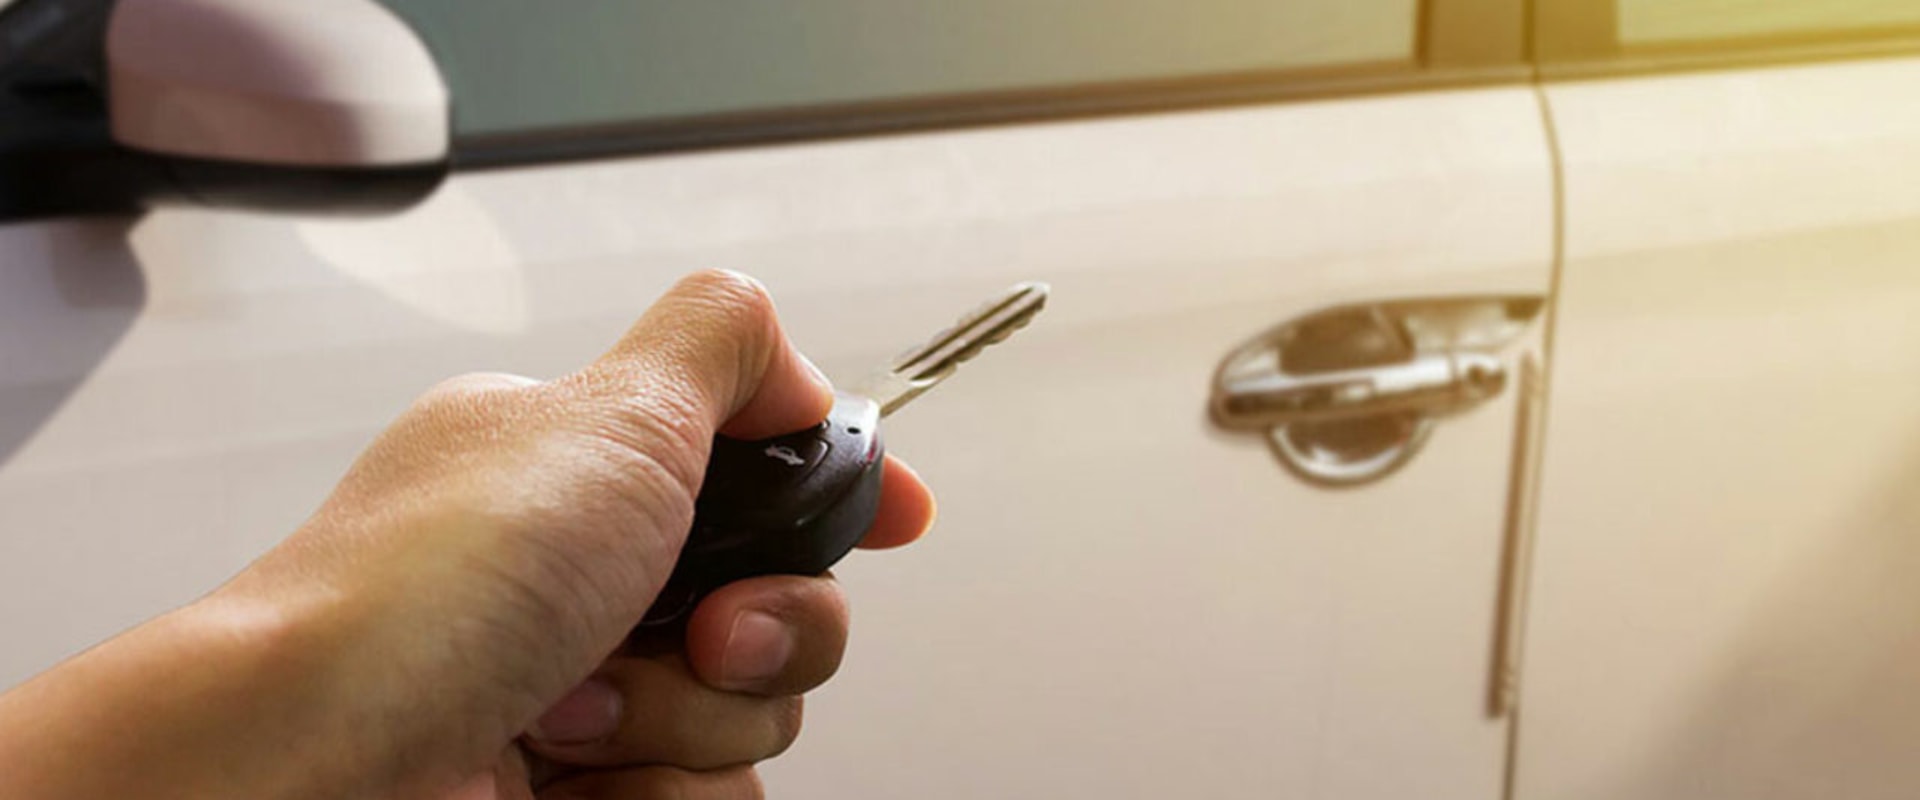 Do Locksmiths Provide You With a New Key?